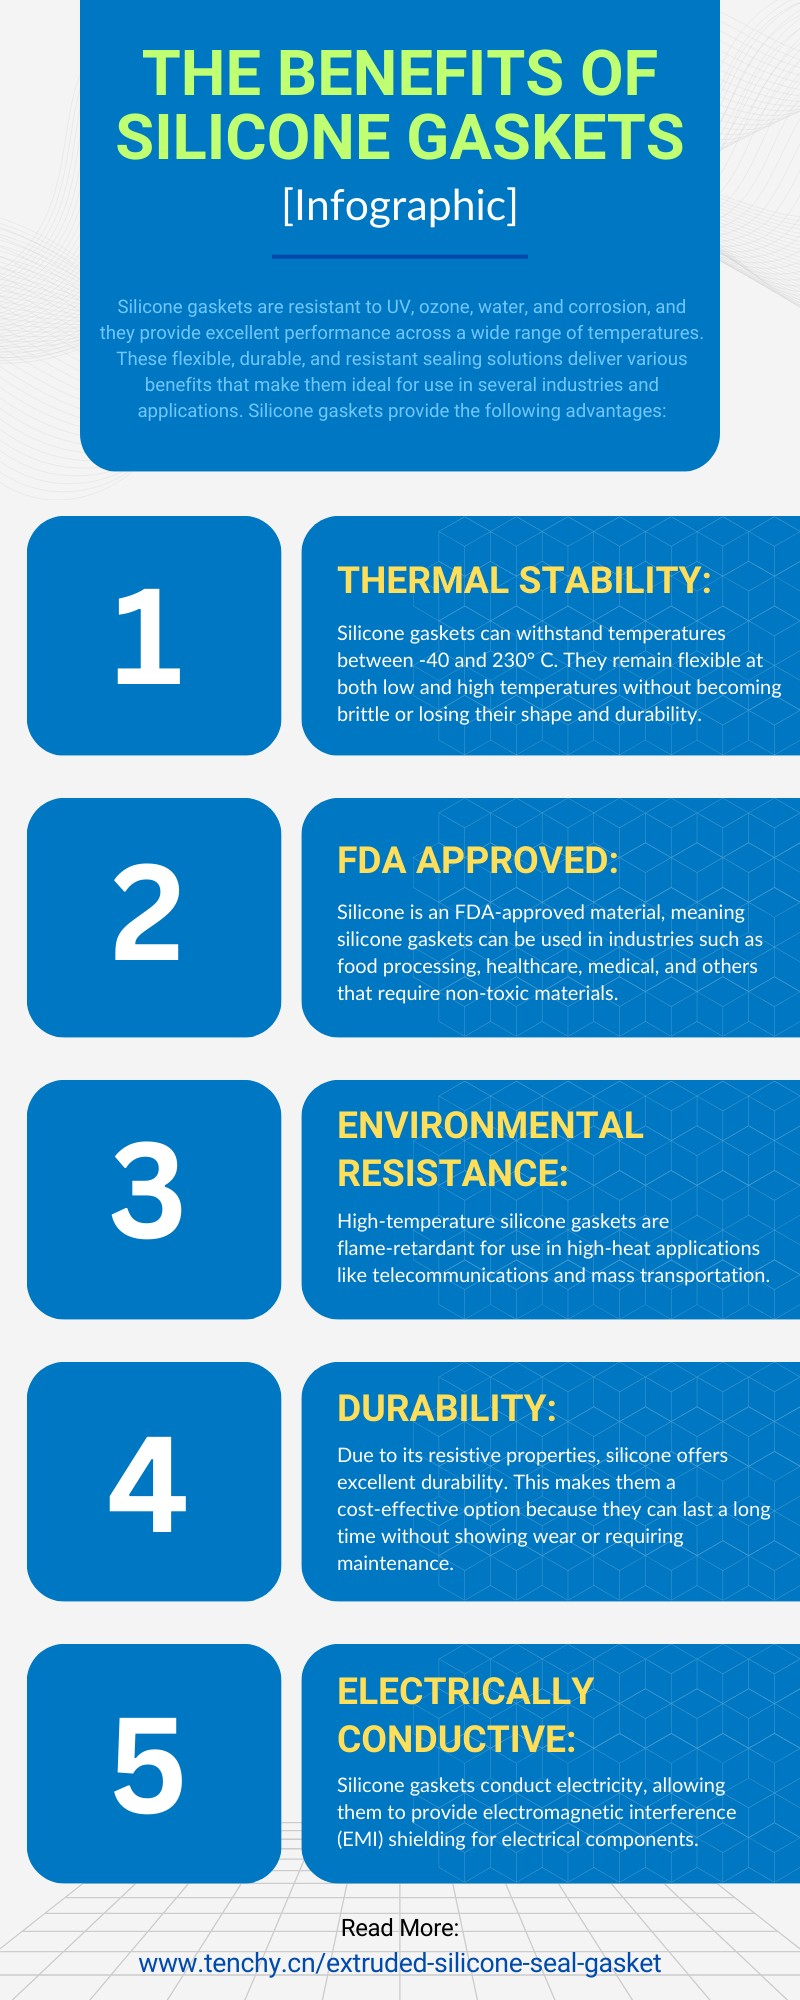 The Benefits of Silicone Gaskets [Infographic]